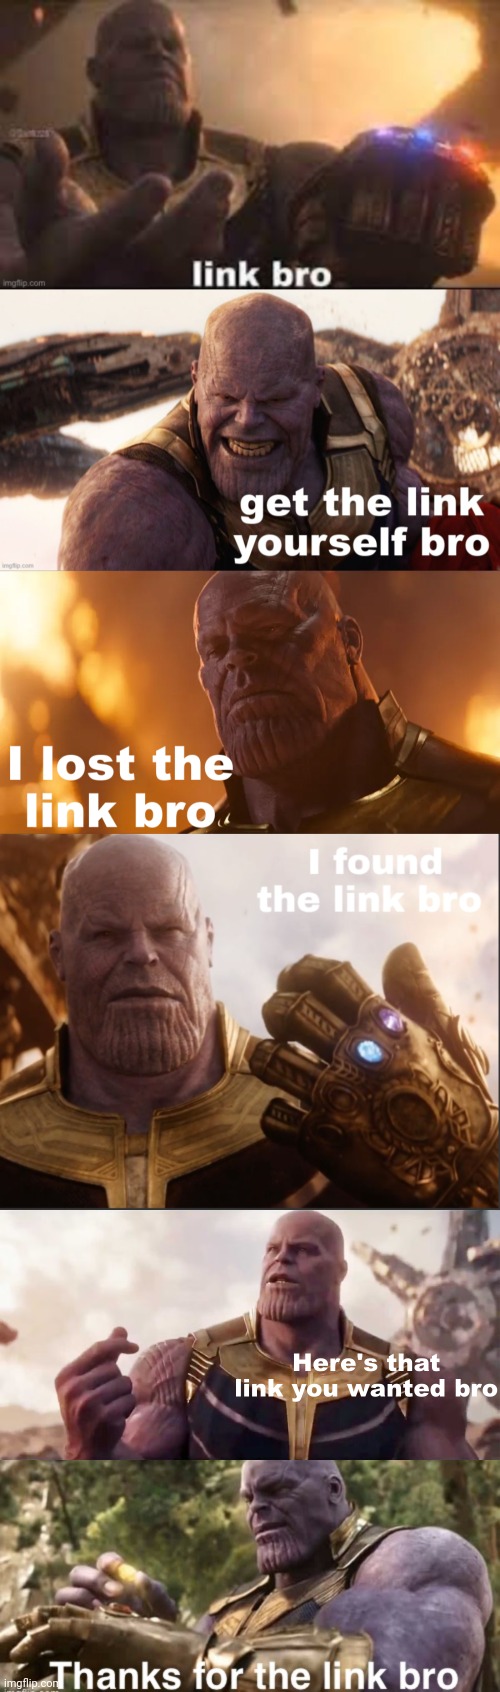 "Link bro" series | image tagged in link bro,get the link yourself bro,i lost the link bro,i found the link bro,here's that link you wanted bro | made w/ Imgflip meme maker